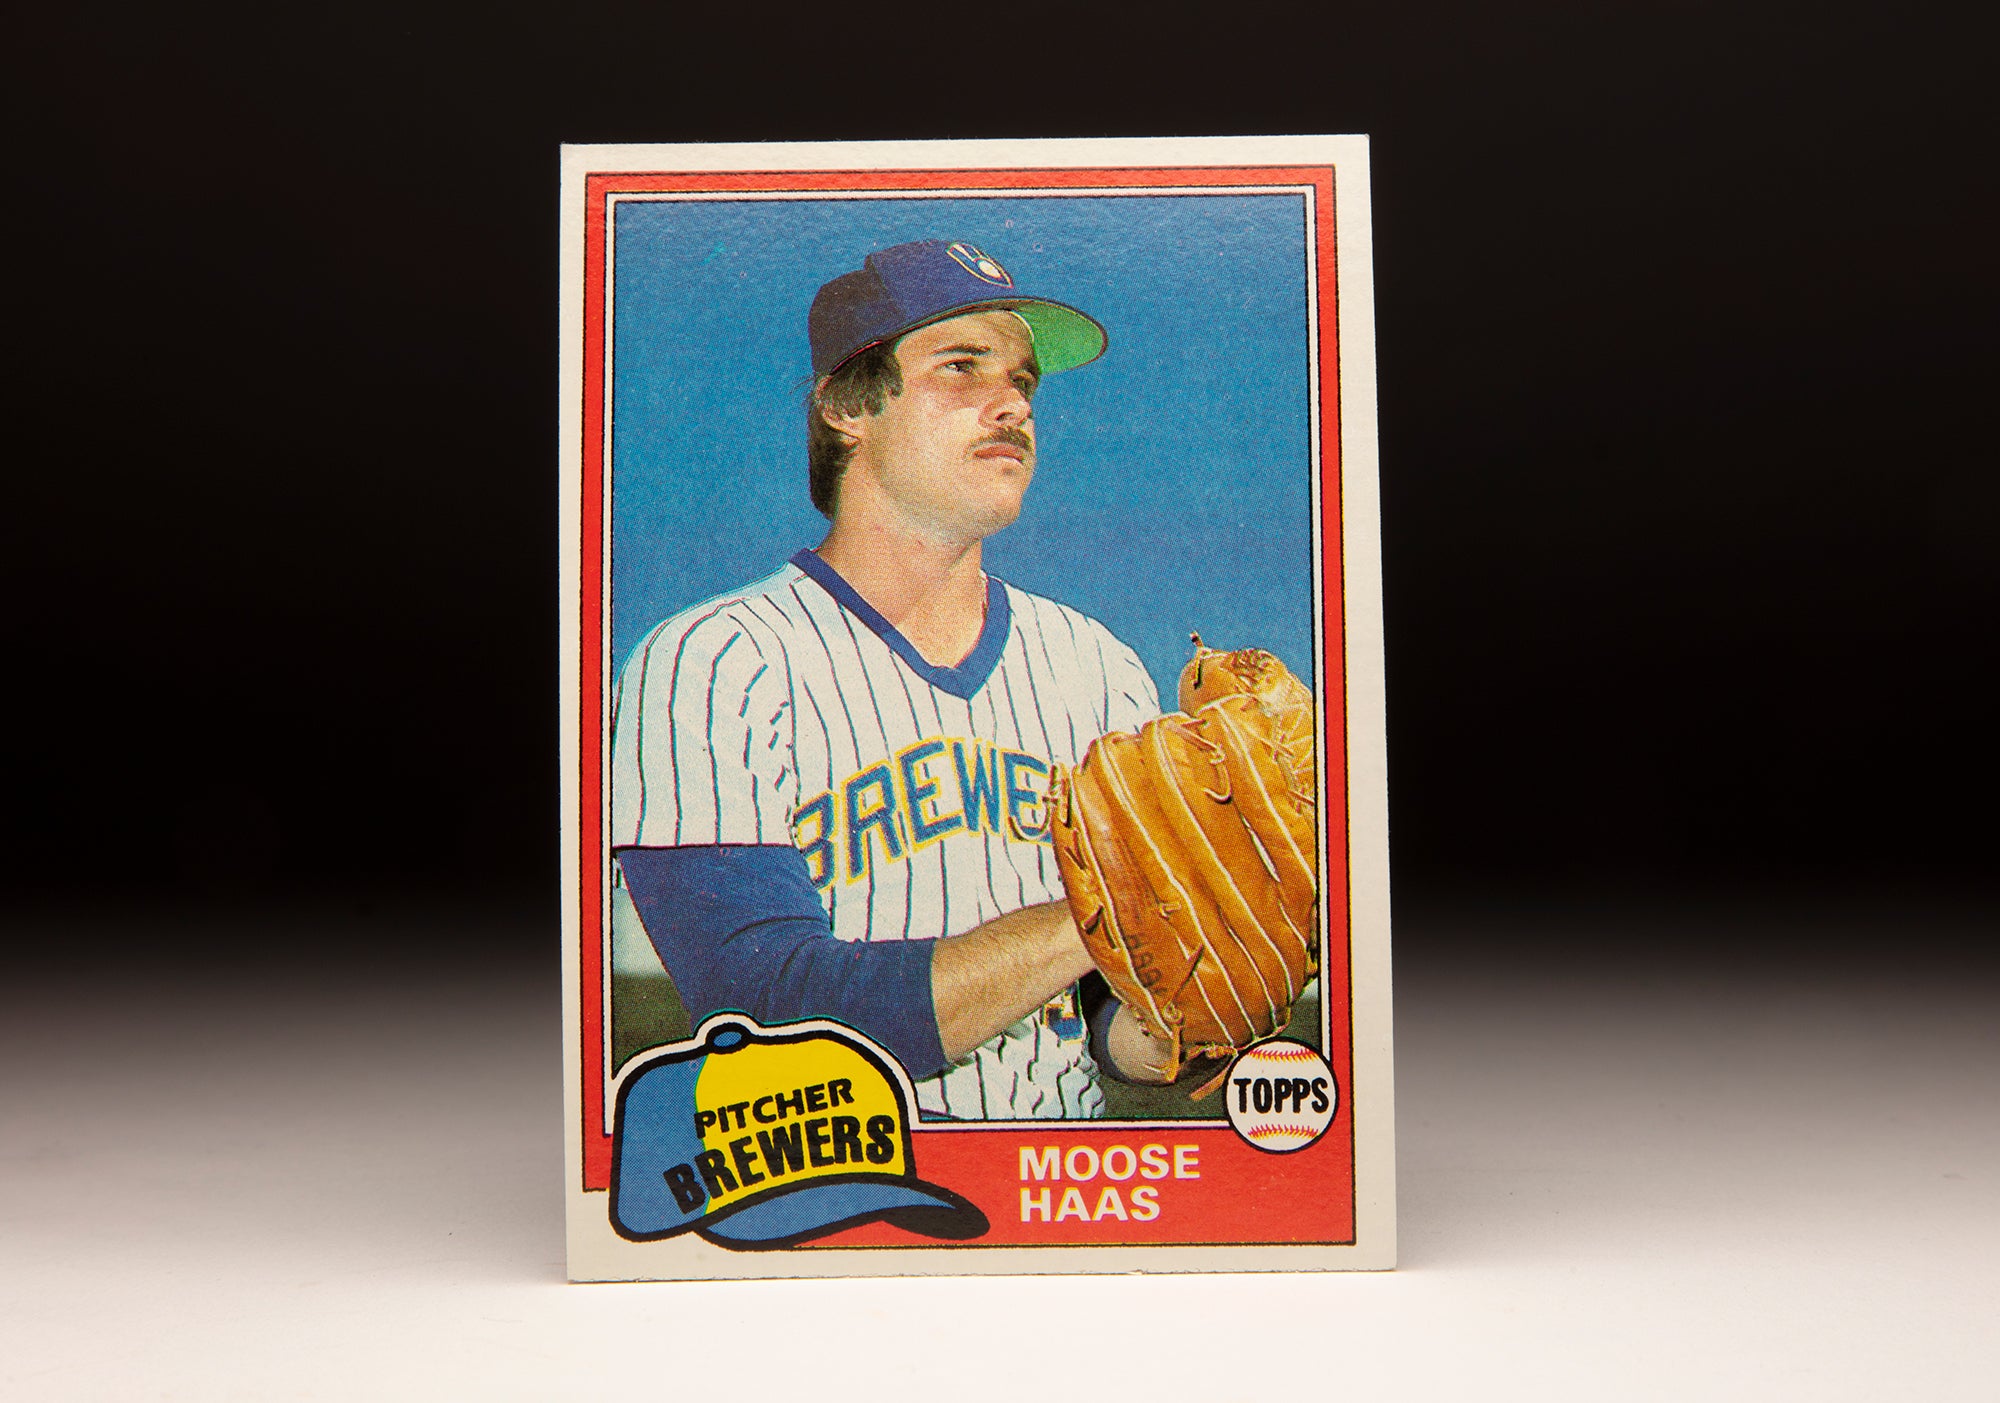 Front of 1981 Topps Moose Haas baseball card. He is wearing a white home jersey with blue pinstripes and blue letters with yellow trim.